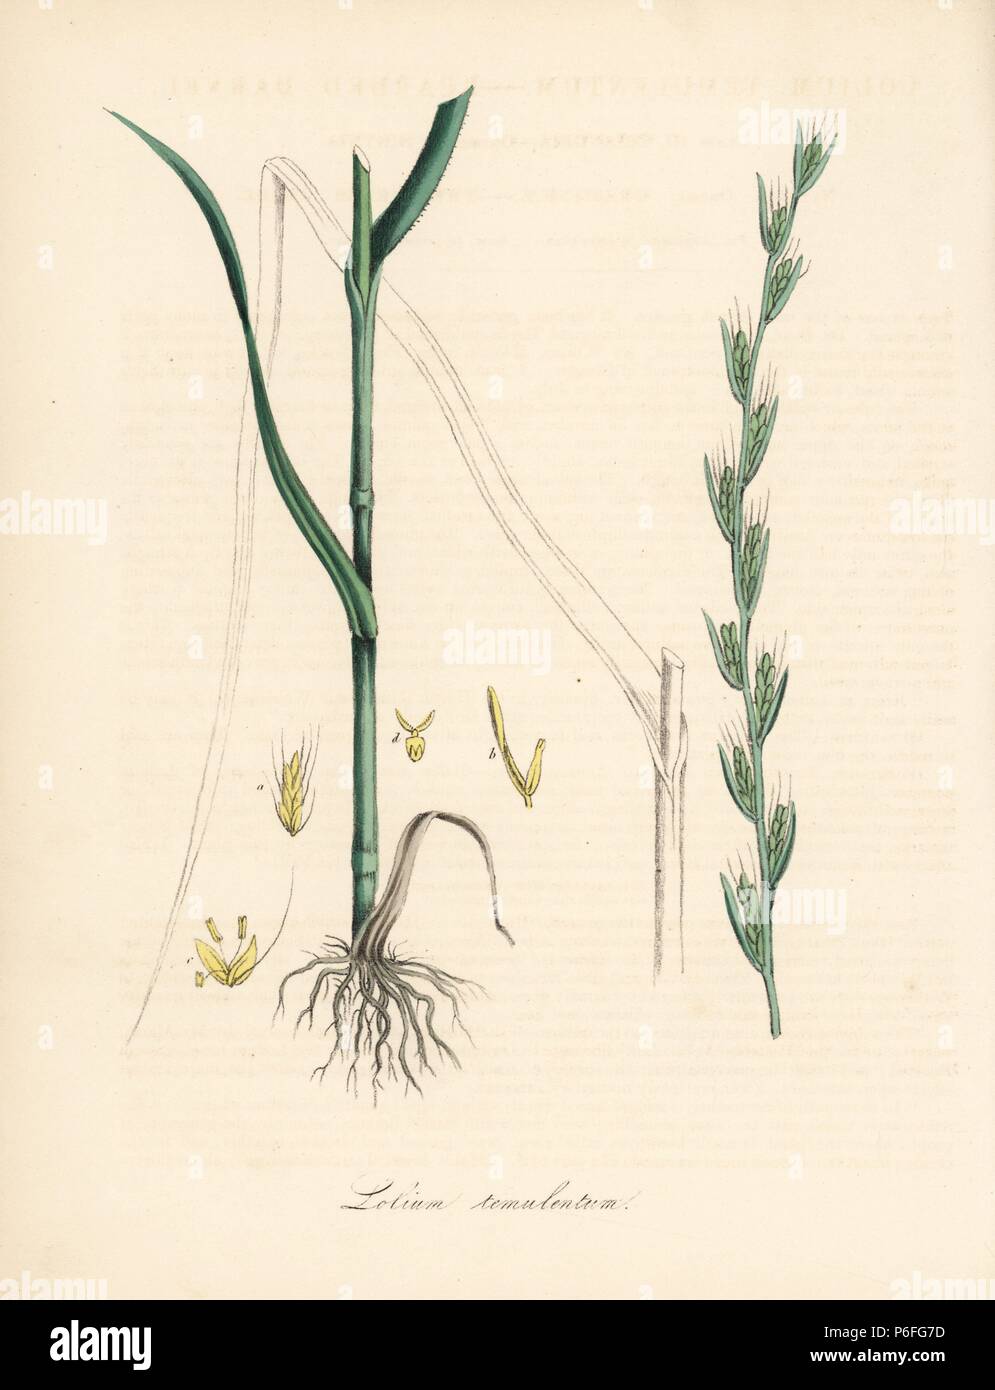 Bearded darnel or poison darnel, Lolium temulentum, with stalk, leaf, roots and seed. Handcoloured zincograph by C. Chabot drawn by Miss M. A. Burnett from her "Plantae Utiliores: or Illustrations of Useful Plants," Whittaker, London, 1842. Miss Burnett drew the botanical illustrations, but the text was chiefly by her late brother, British botanist Gilbert Thomas Burnett (1800-1835). Stock Photo